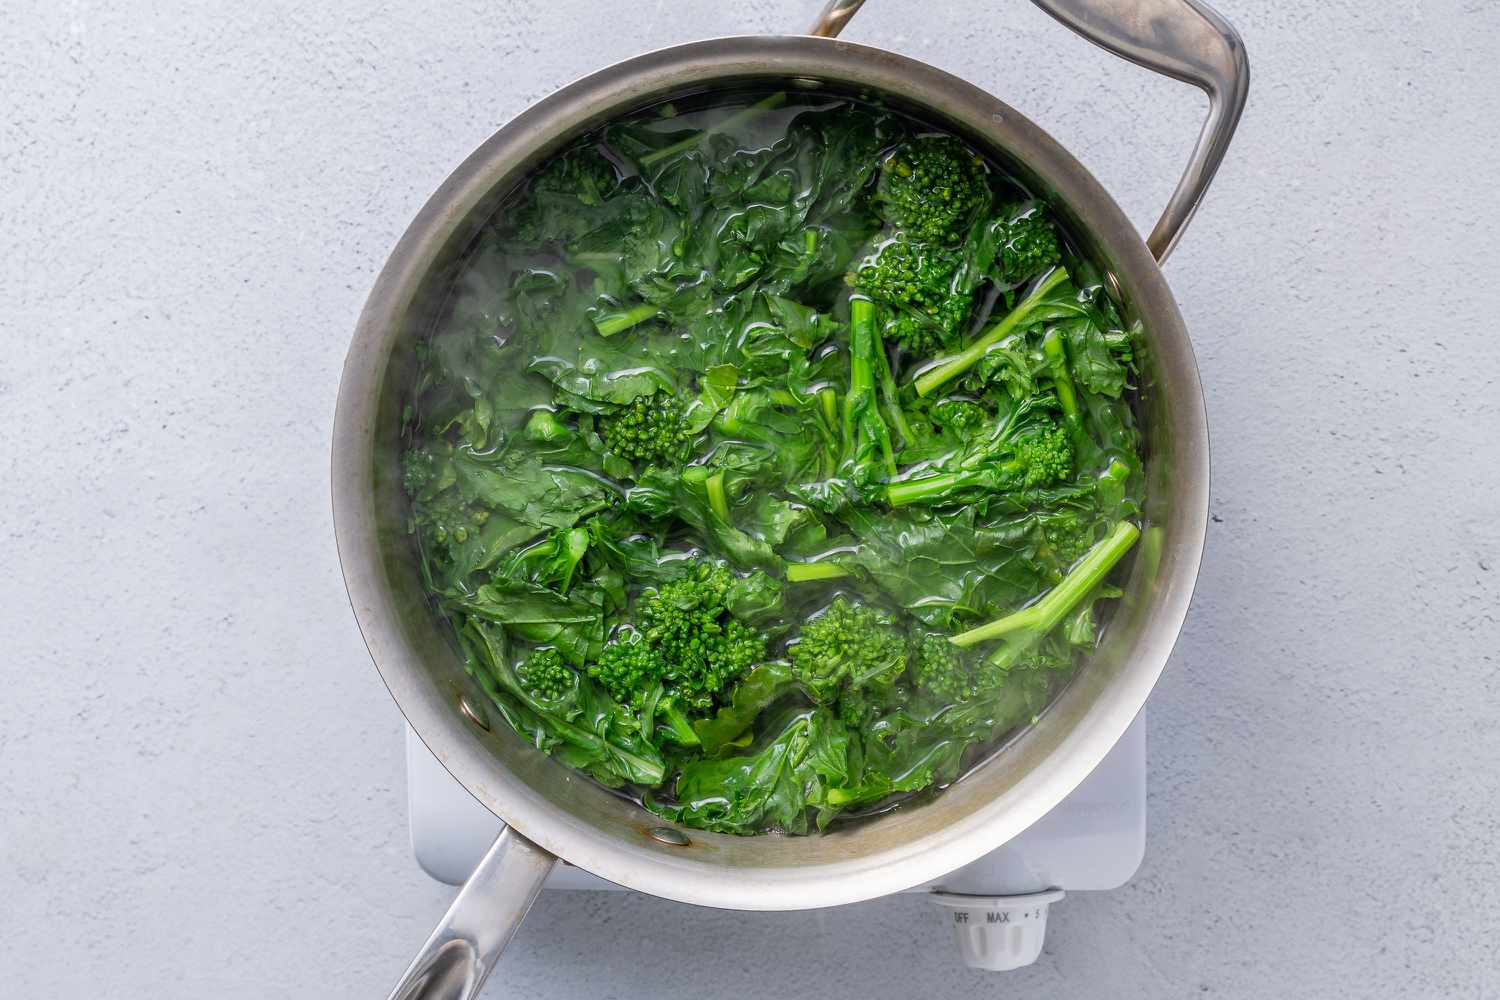 Broccoli rabe cooking in a pot of boiling water